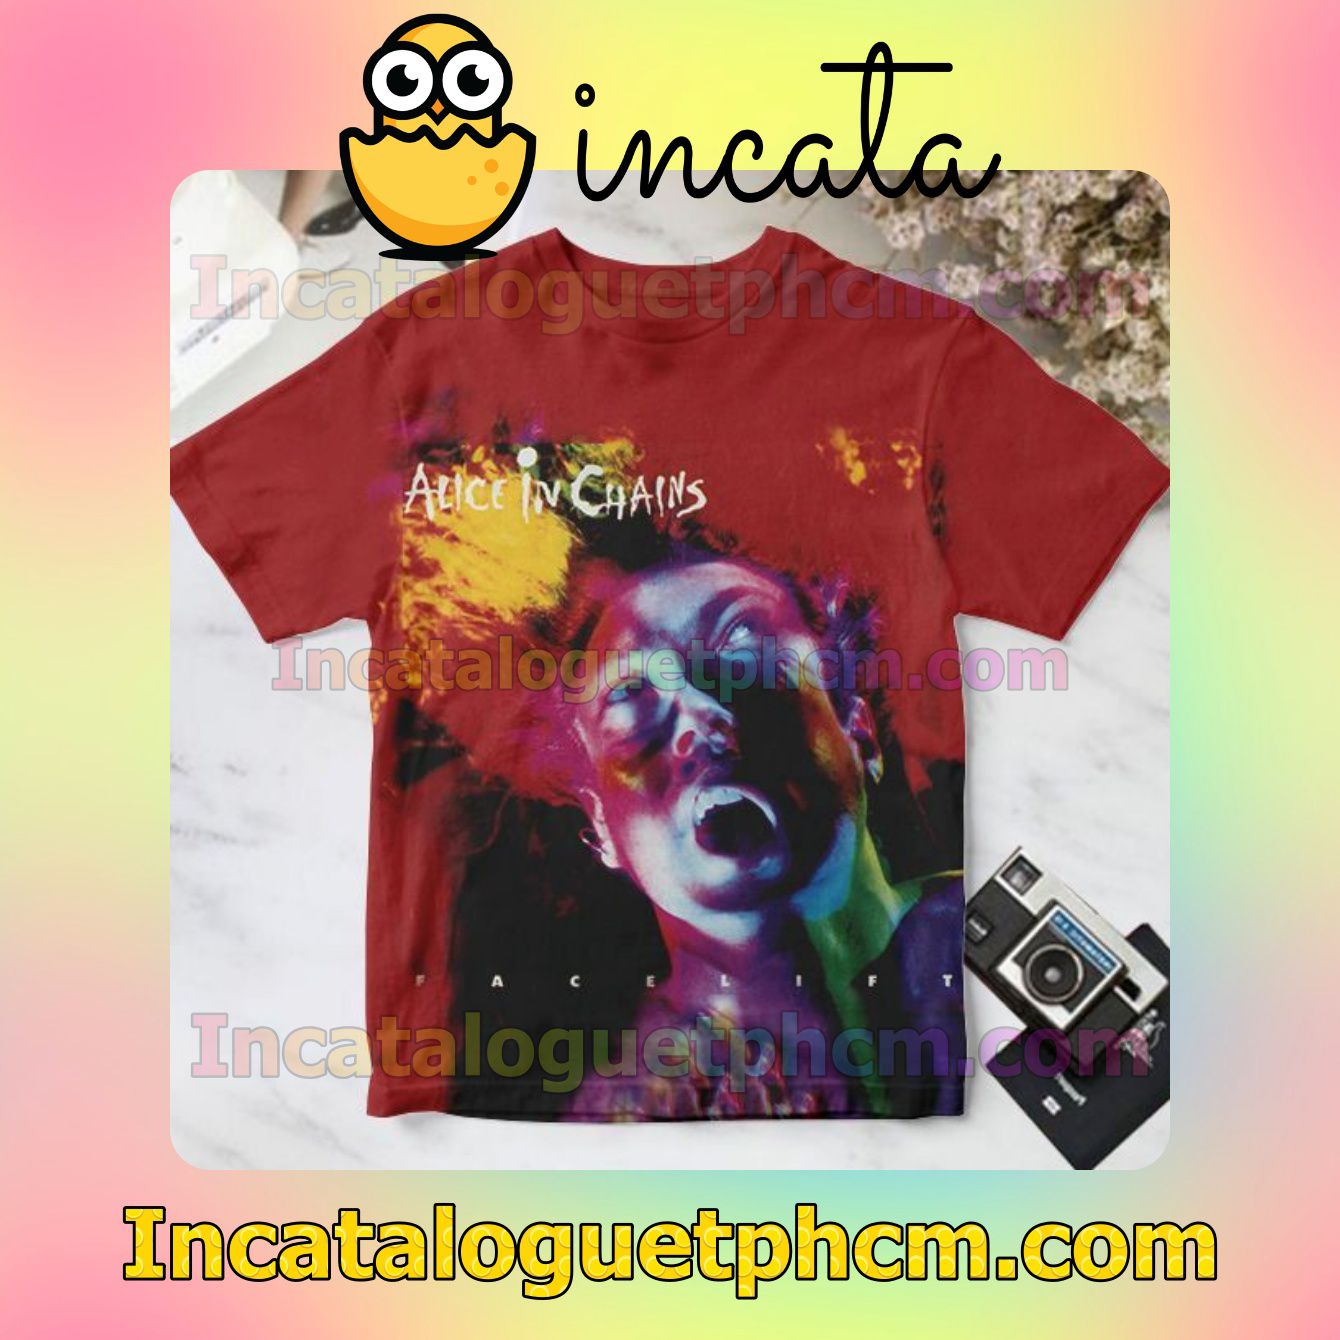 Alice In Chains Facelift Album Cover Red For Fan Personalized T-Shirt